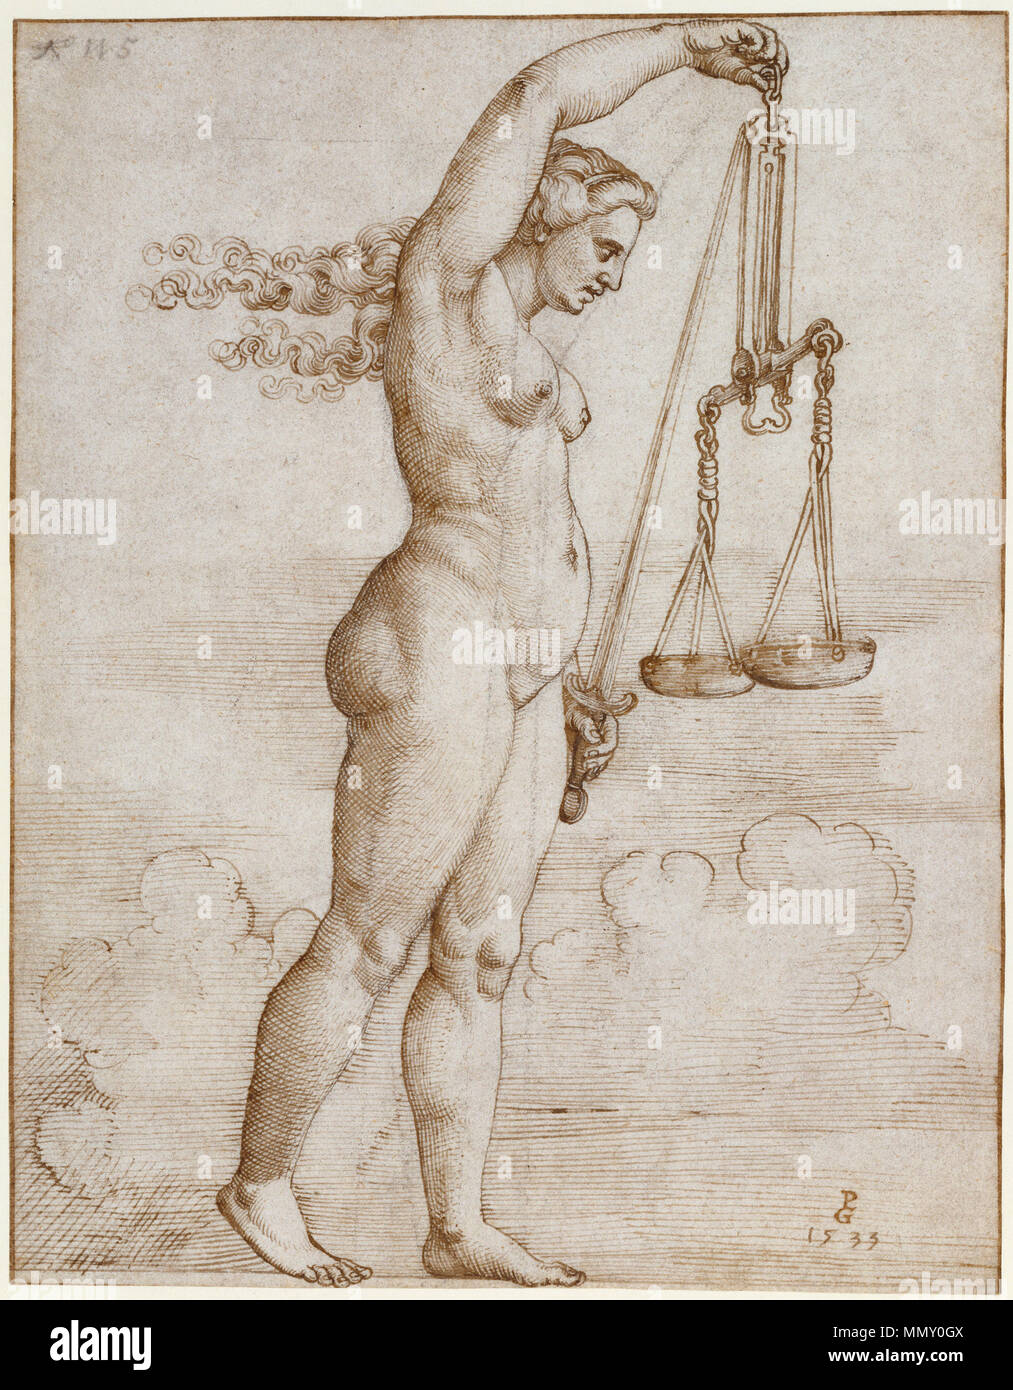 Allegory of Justice; Georg Pencz, German, 1484/1485 - 1545; Germany, Europe; 1533; Pen and brown ink over black chalk; 19.2 x 14.9 cm (7 9/16 x 5 7/8 in.); 87.GA.103 Georg Pencz - Allegorie der Gerechtigkeit Stock Photo